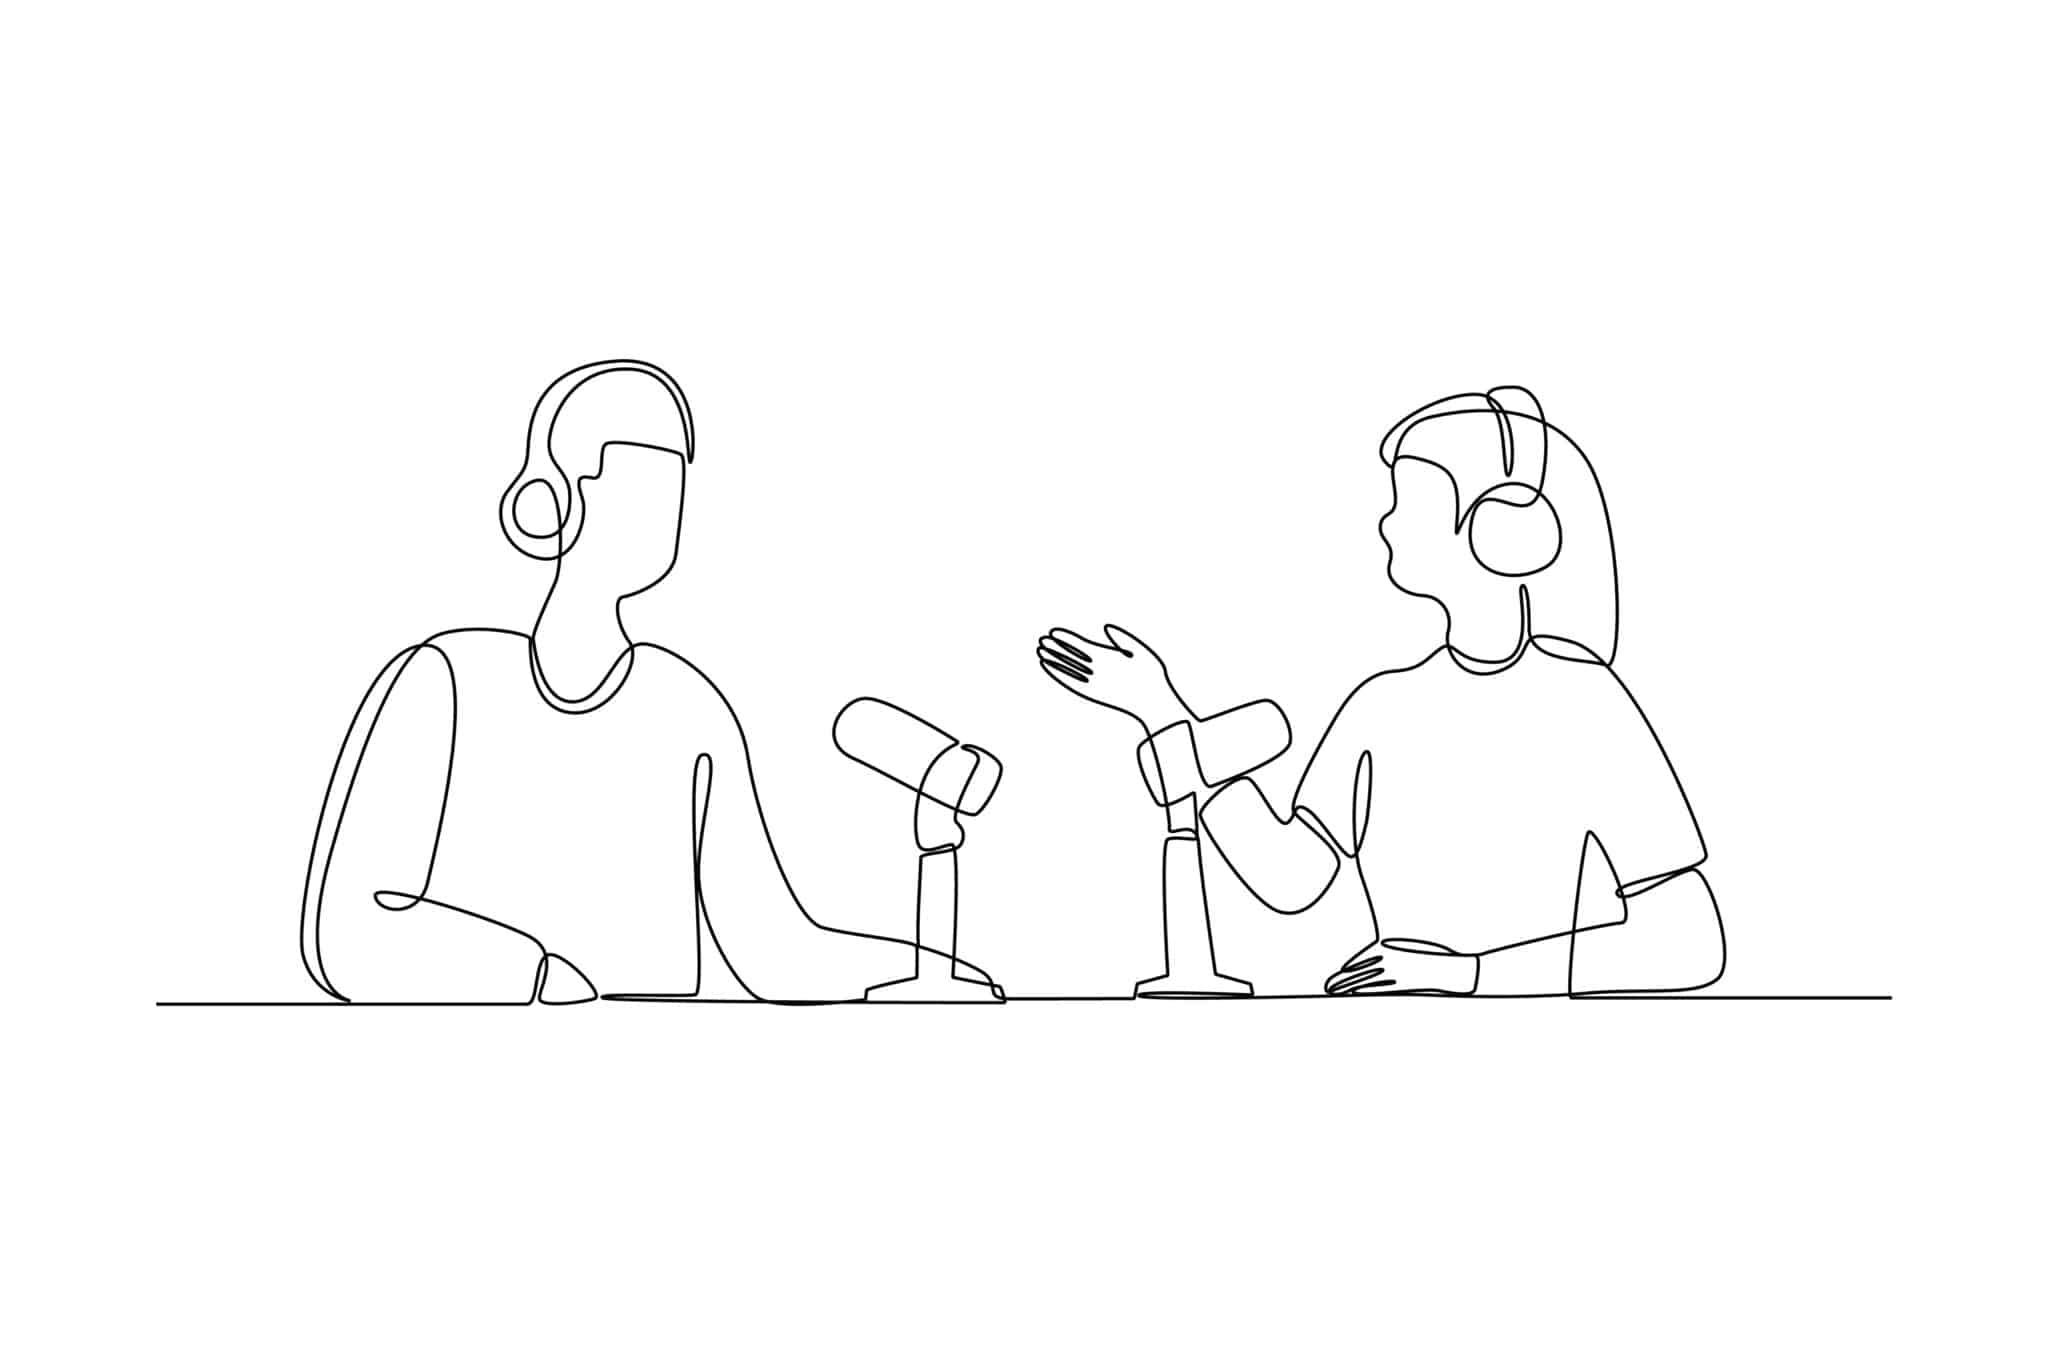 One-line illustration of a podcast interview that leverages professional transcription services.